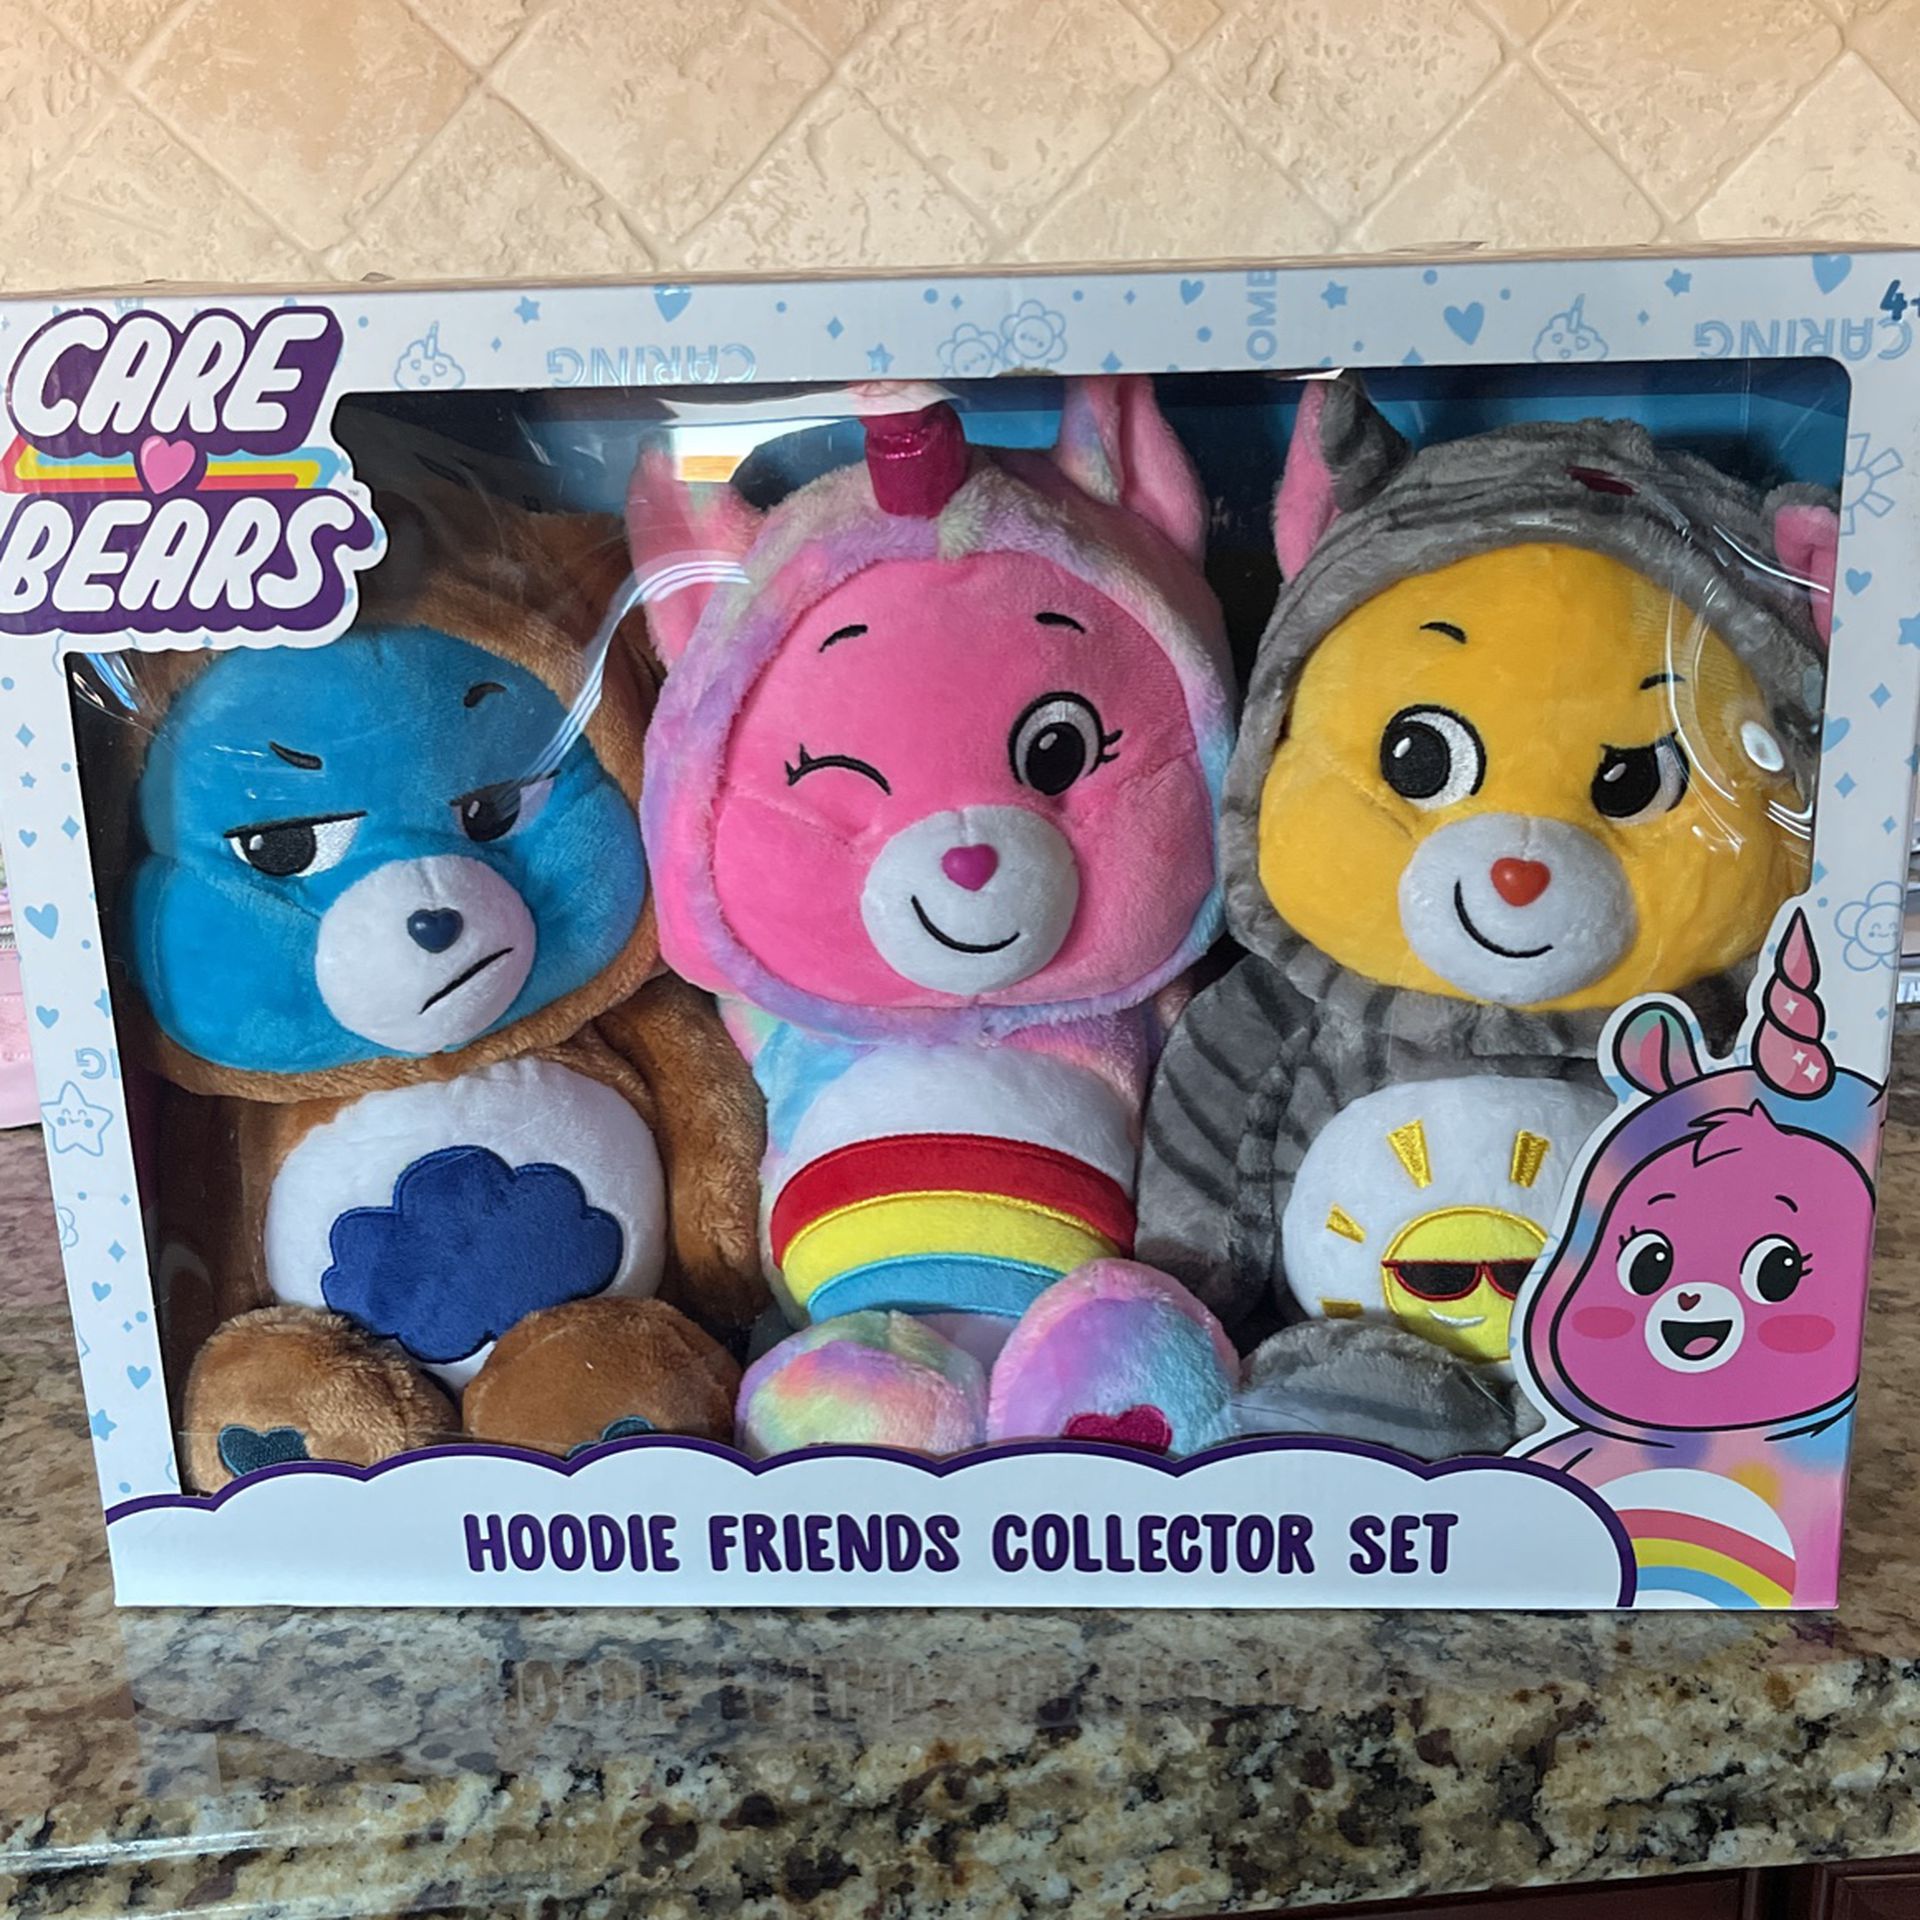 Care bears hoodie friends collector Set